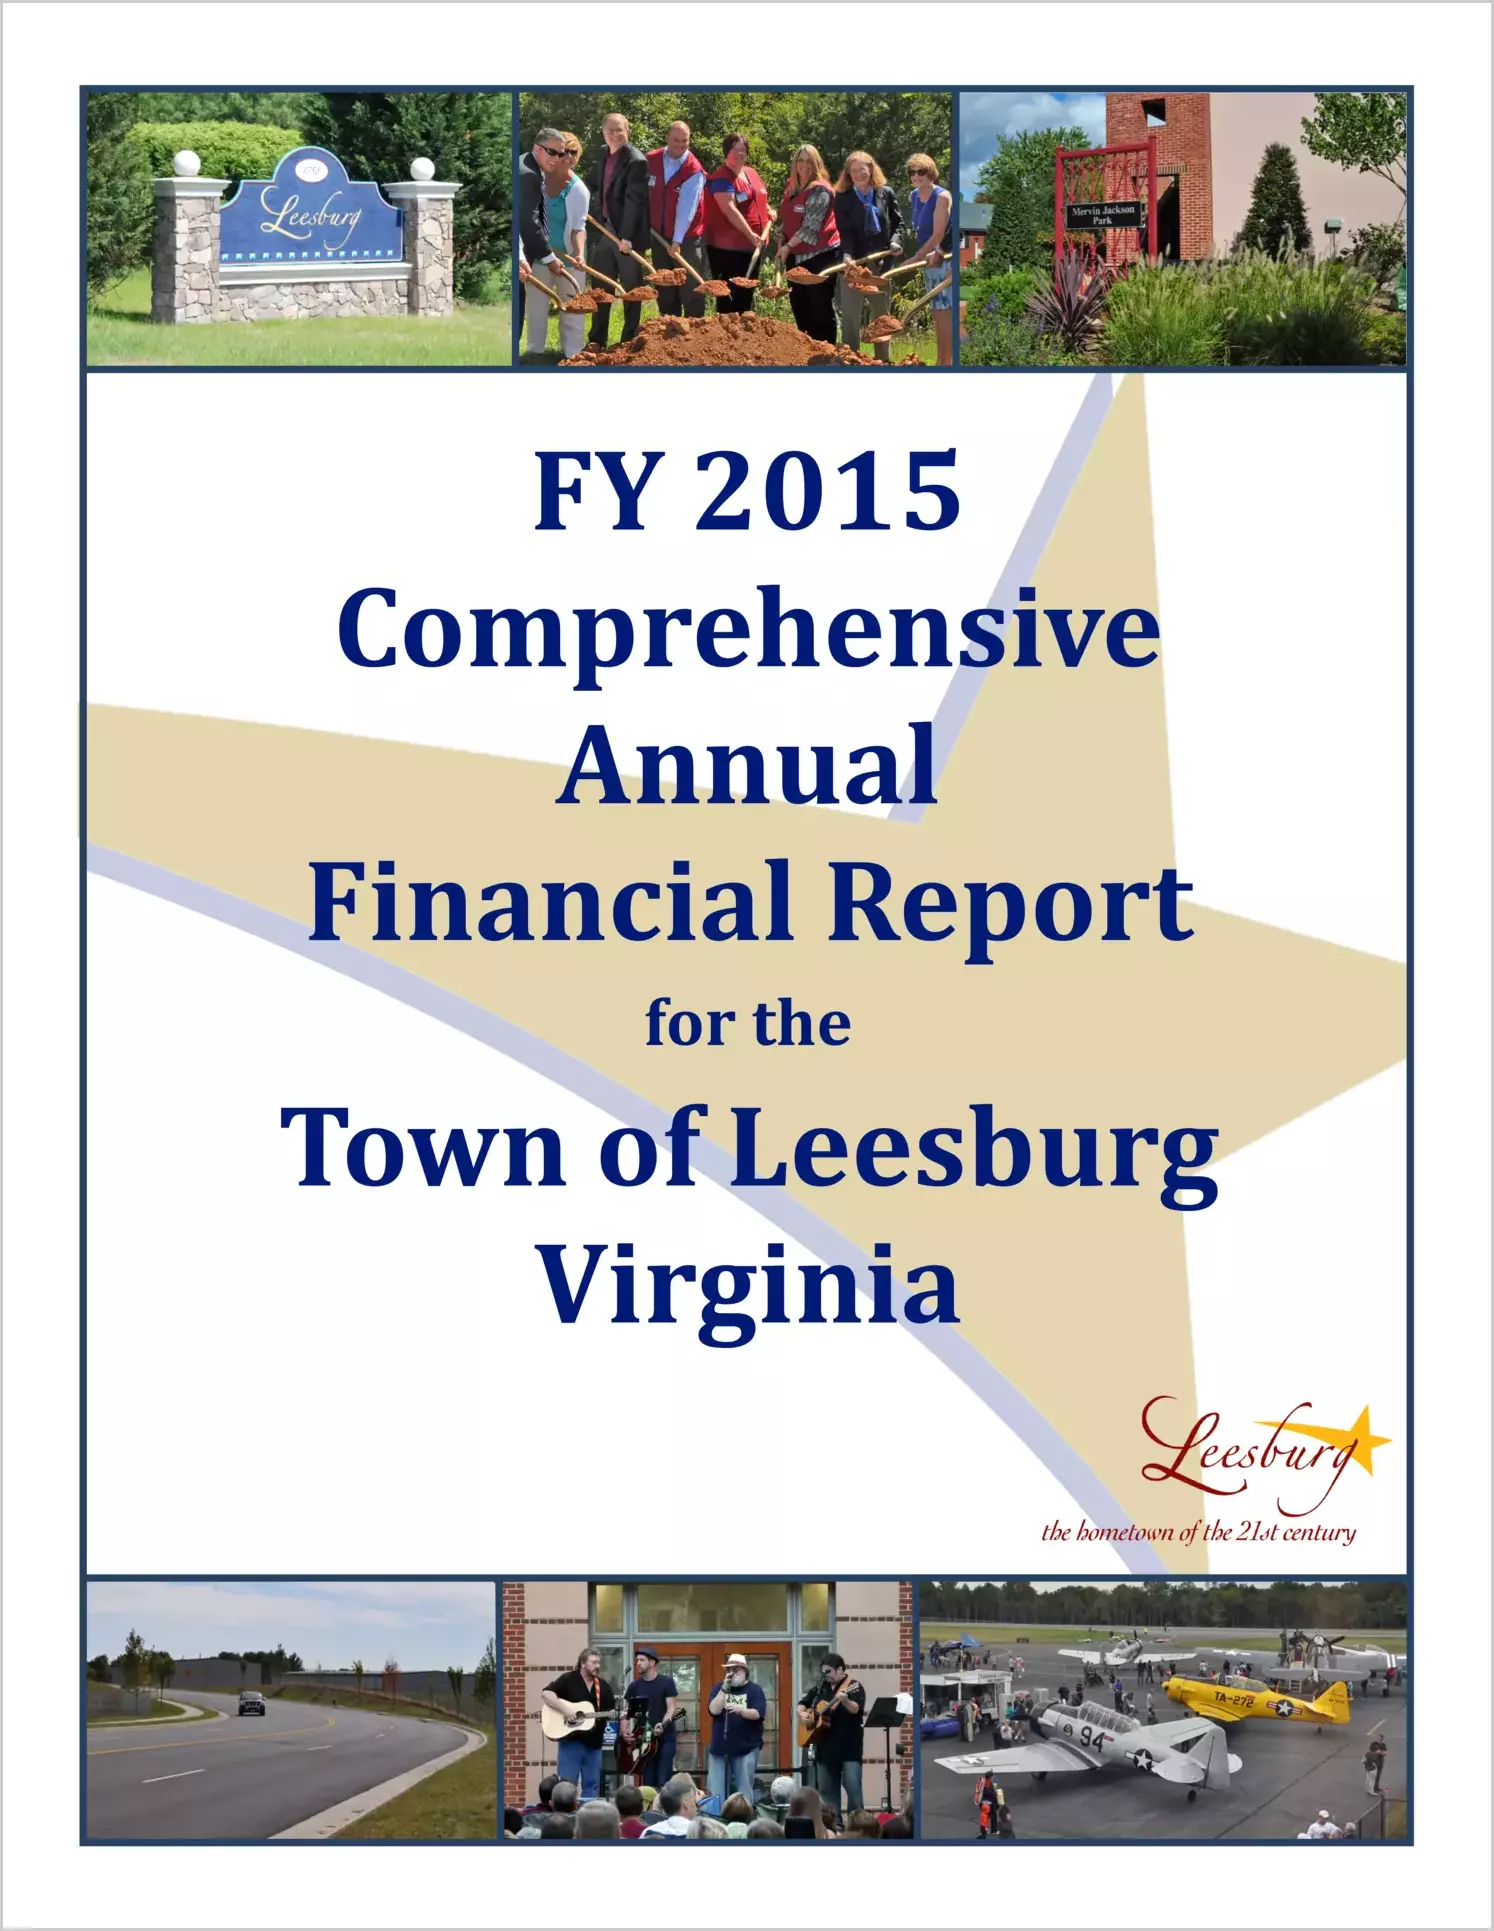 2015 Annual Financial Report for Town of Leesburg